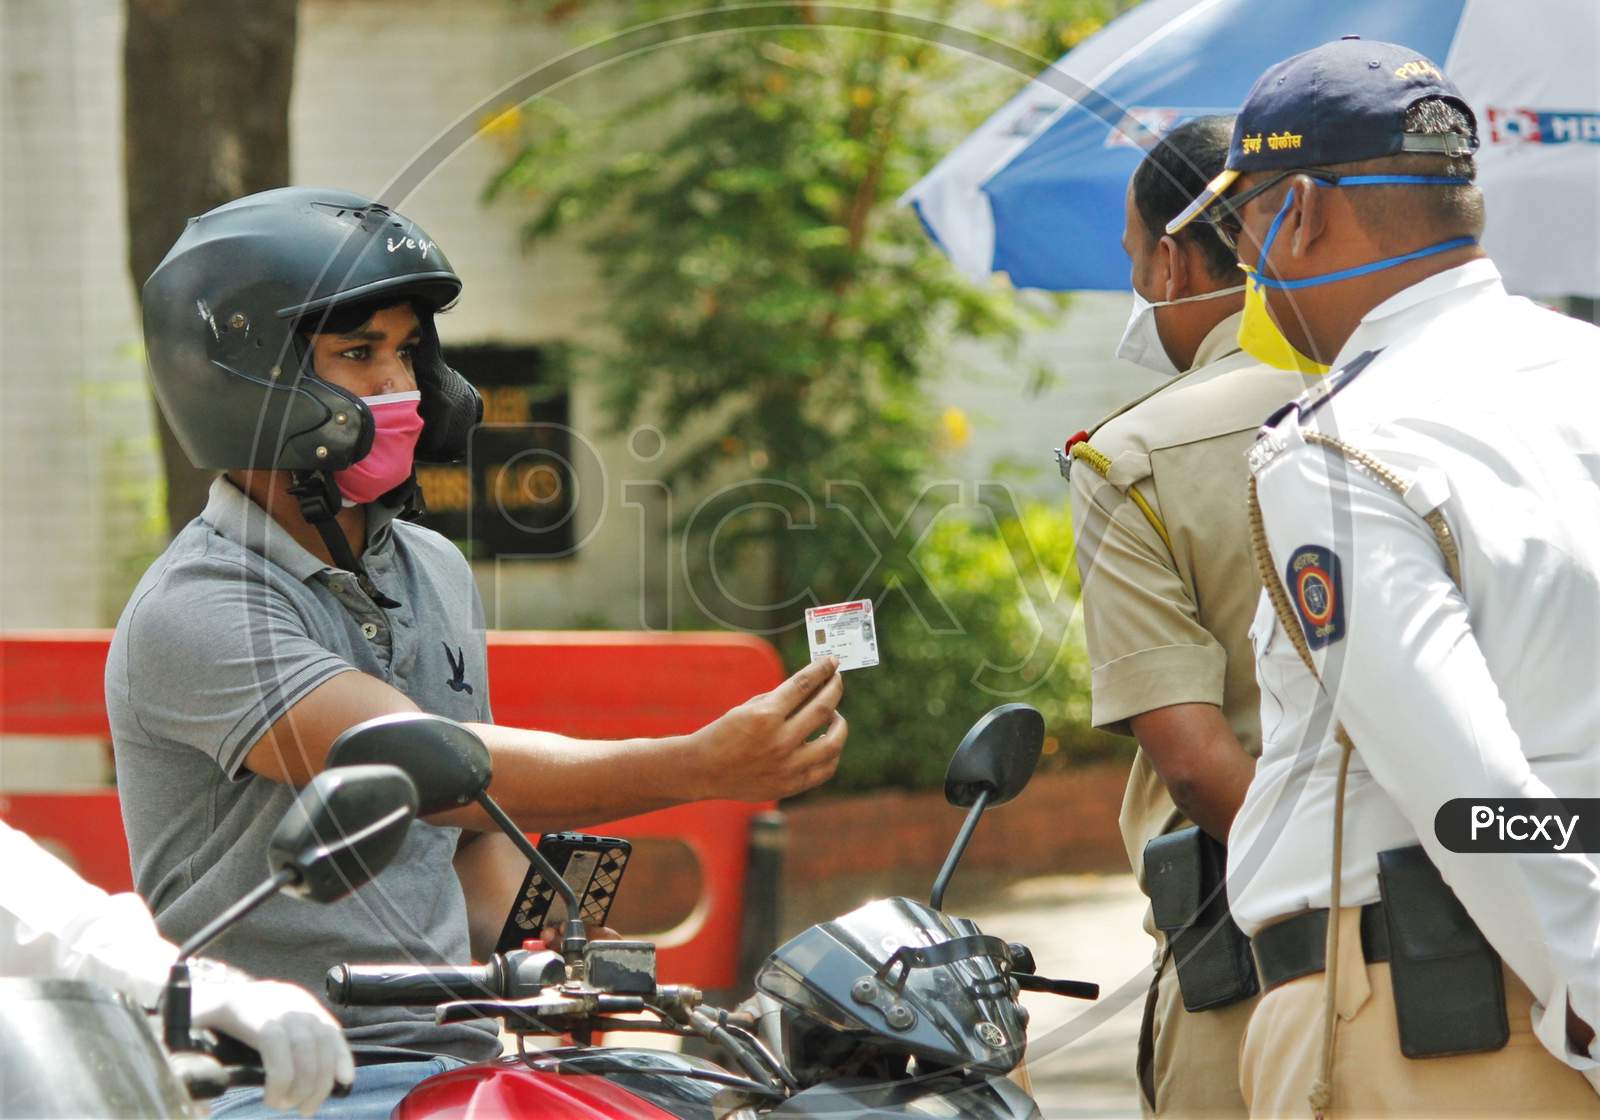 Police personnel ask for IDs and documents from the people coming out during a 21- day nationwide lockdown to limit the spreading of coronavirus disease (COVID-19) in Mumbai, India, on April 10, 2020.